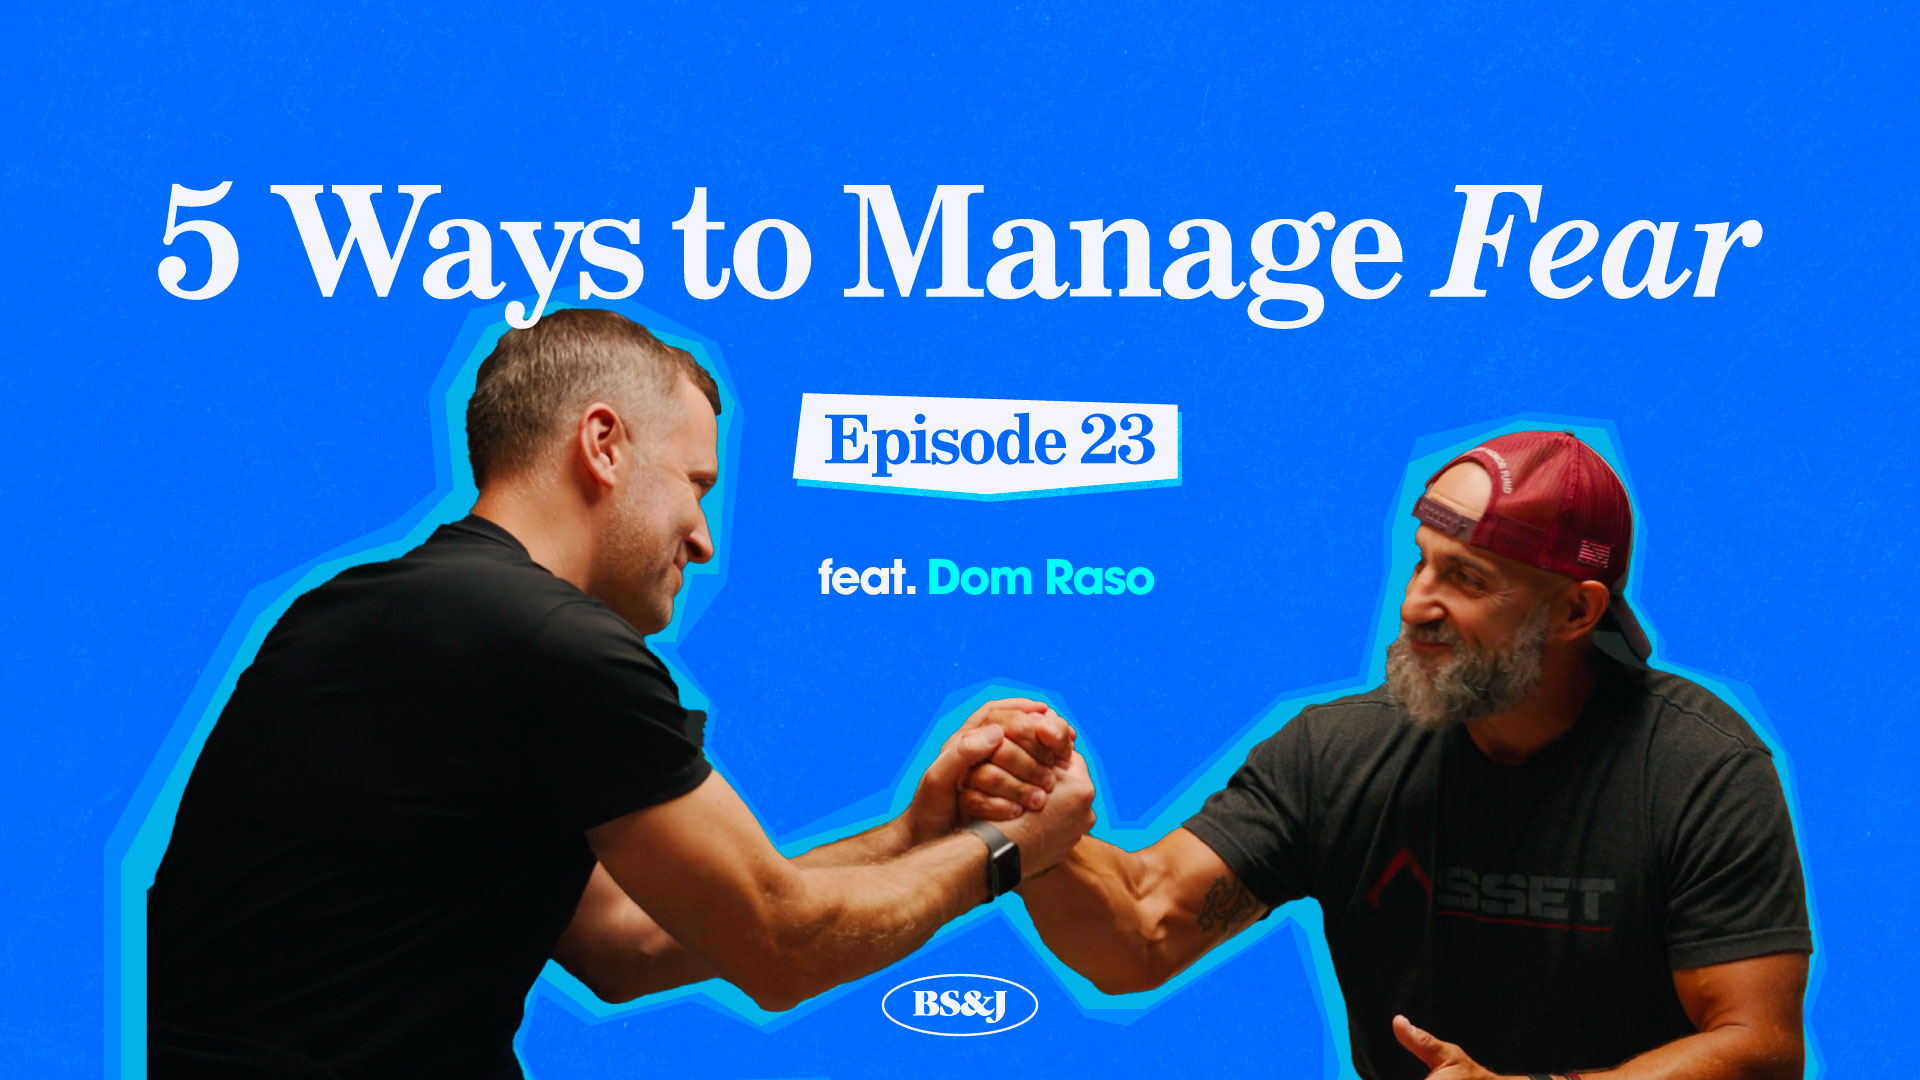 Episode 23 – 5 Ways to Manage Fear